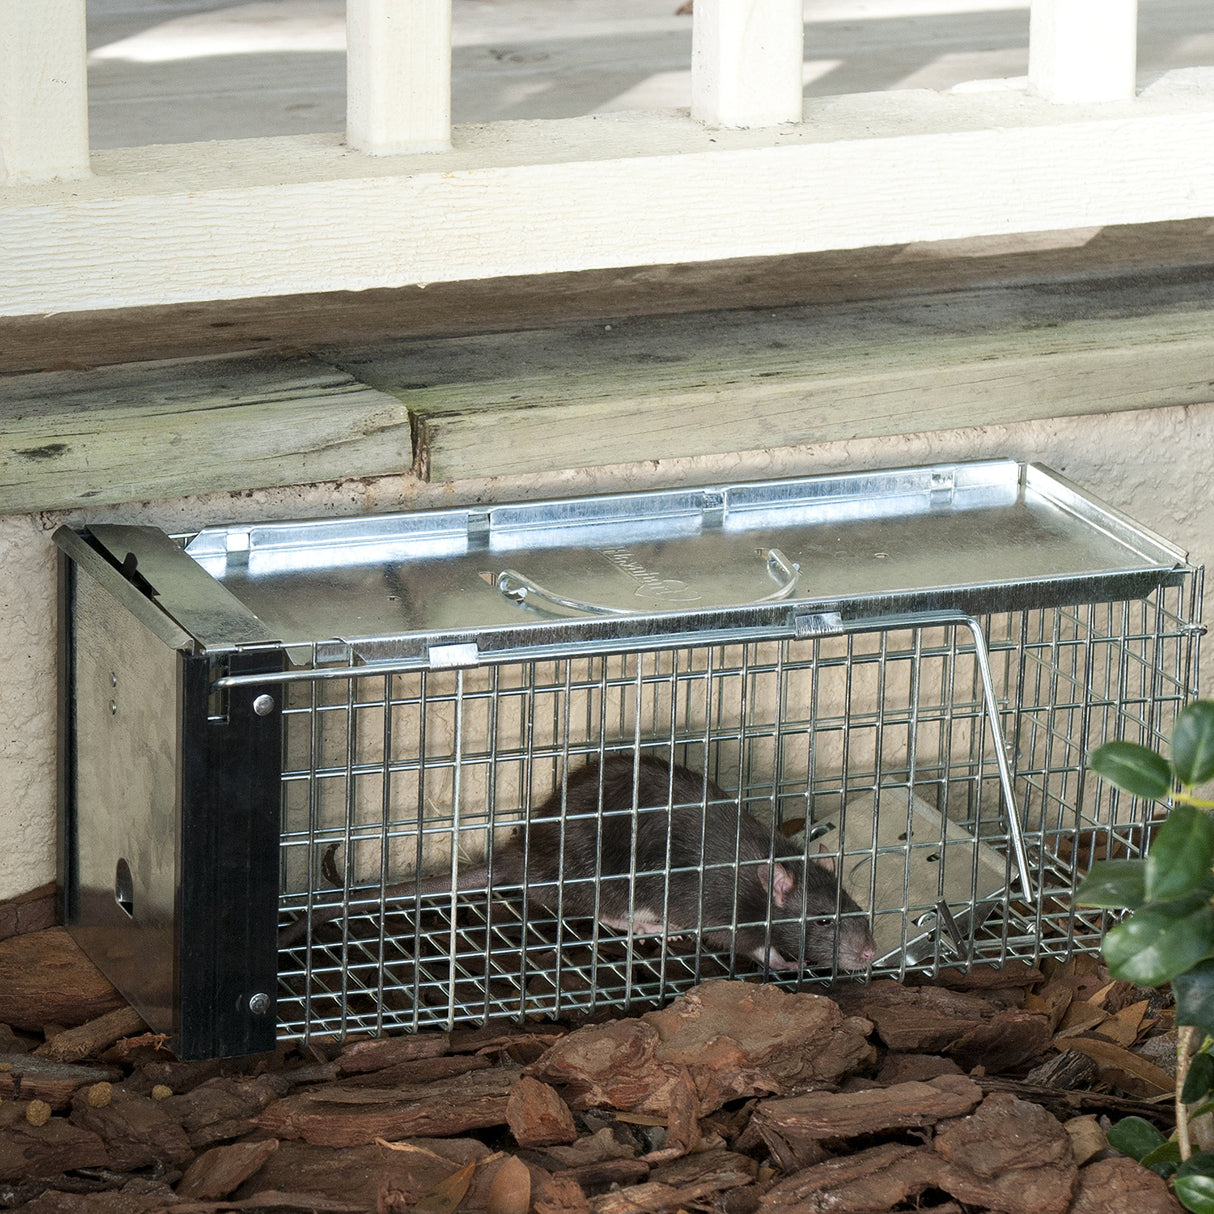 Havahart 0745 One-Door Animal Trap for Chipmunk, Squirrel, Rat, and Weasel, X-Small